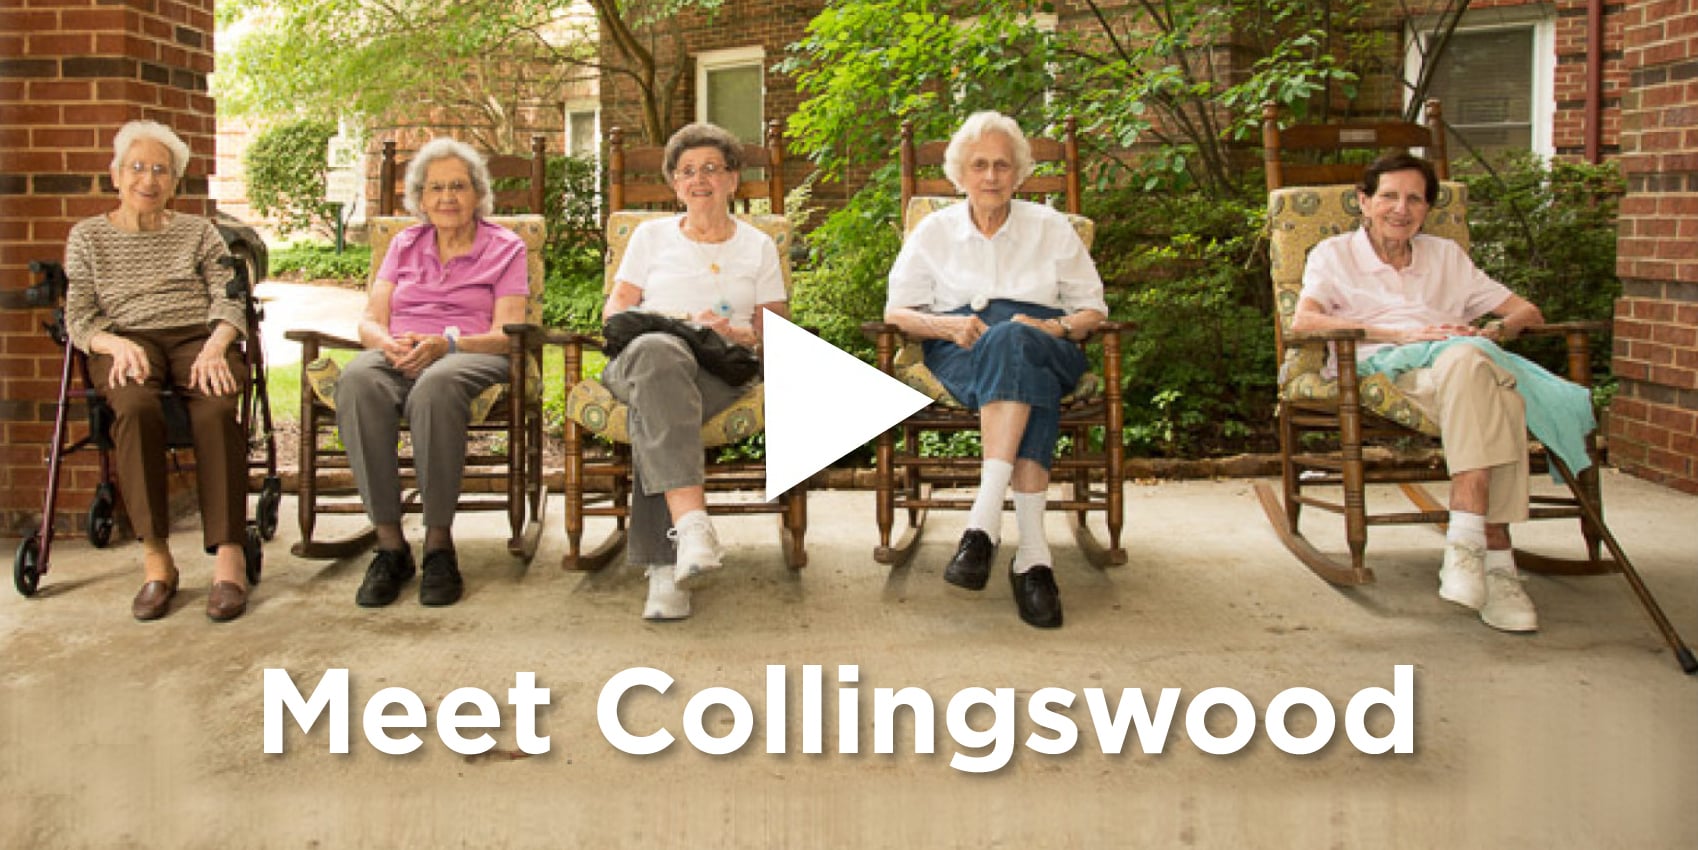 collingswood video poster